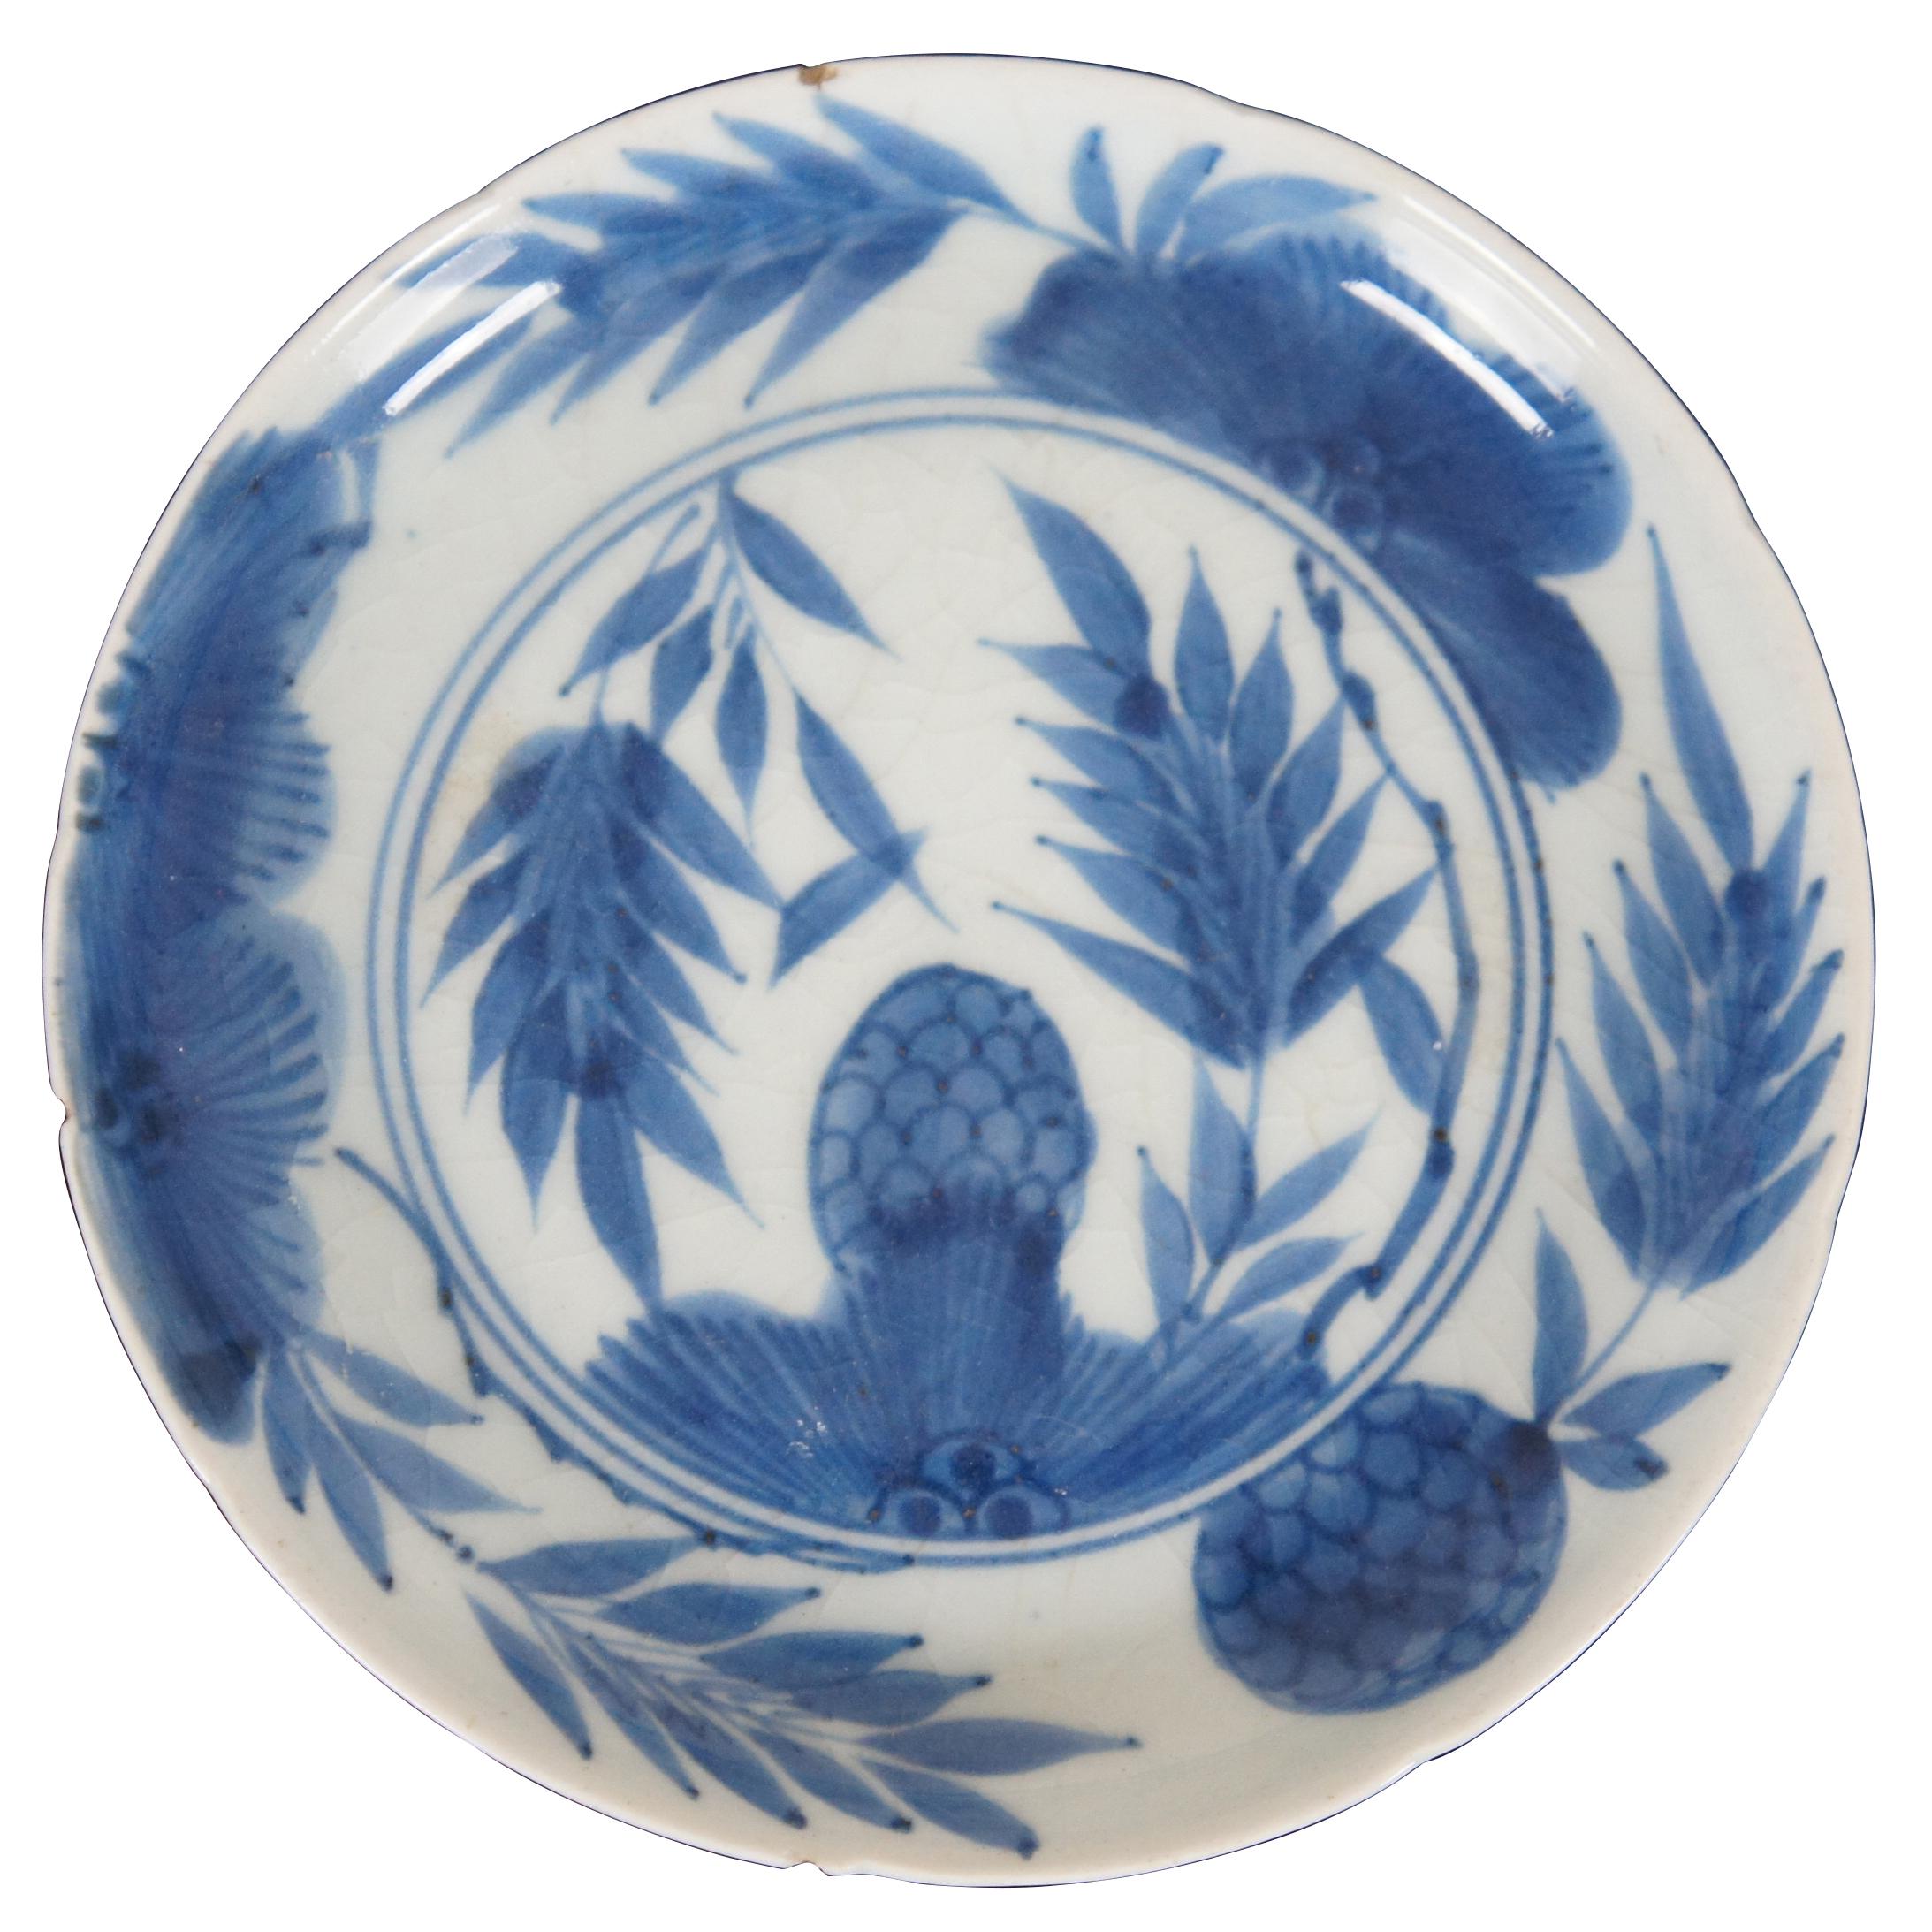 Two 18th century Chinese porcelain plates from the Kang Xi period featuring a pattern of leaves, flowers and pine cones.
 